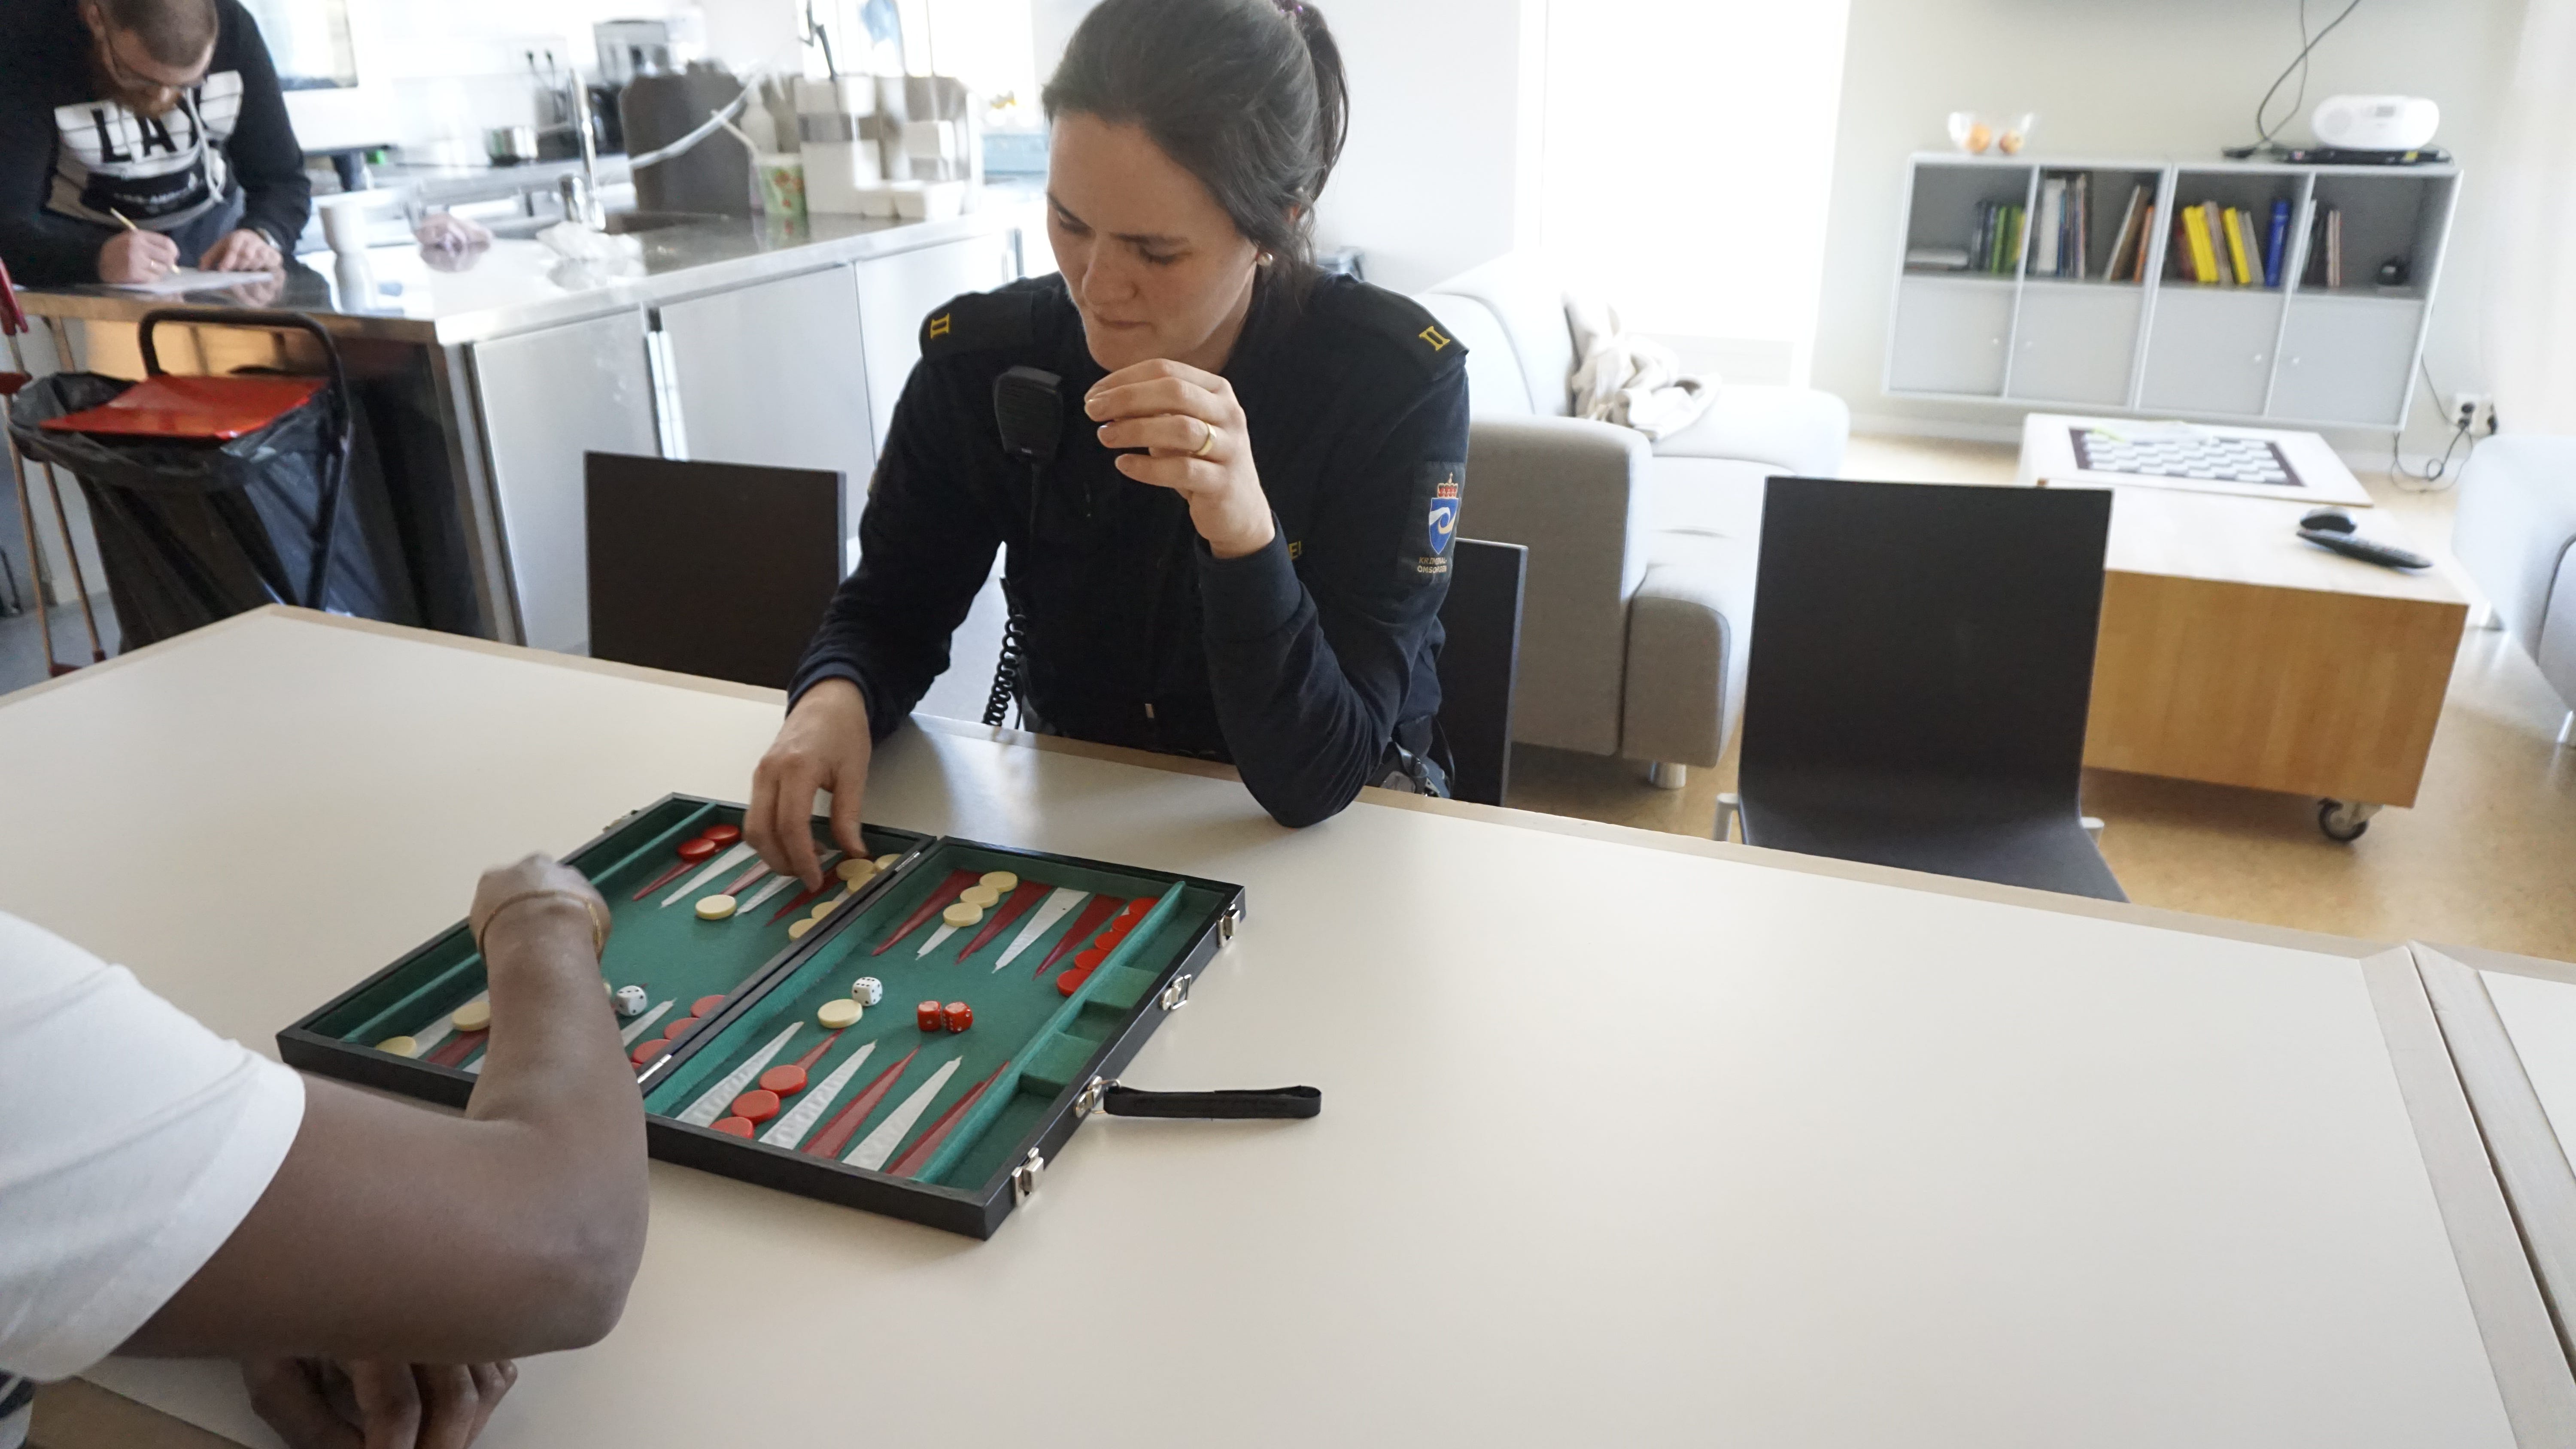 Liv Renate Saevik, a student correctional officer, plays a game with an inmate at Halden Prison. It takes two years to become a correctional officer in Norway, including a year in the classroom and a year of work with inmates.